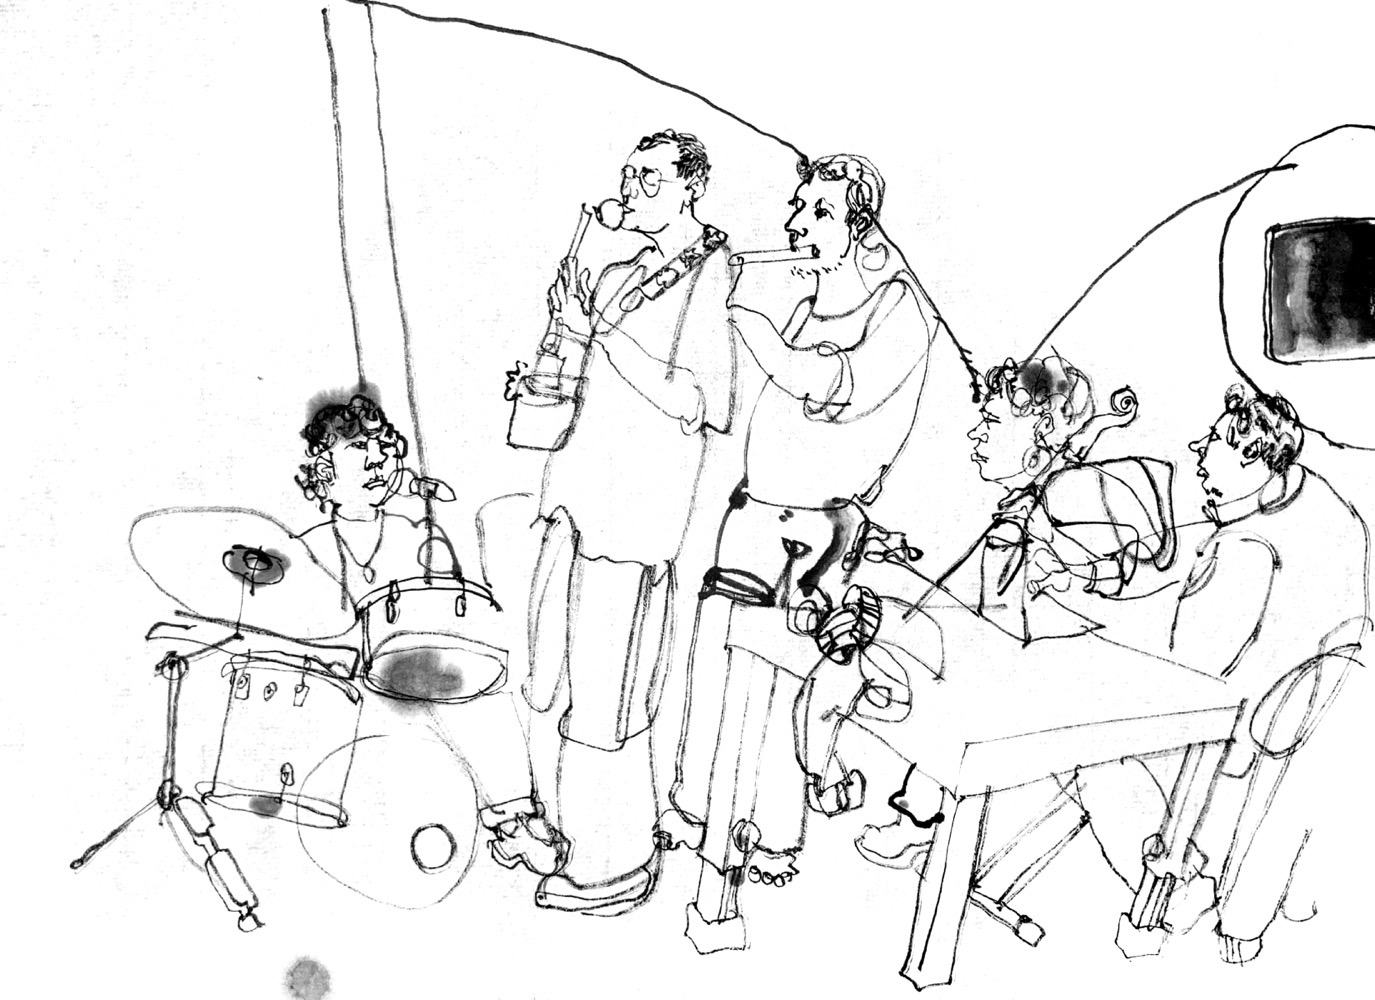 Ink drawing of 5 musicians.